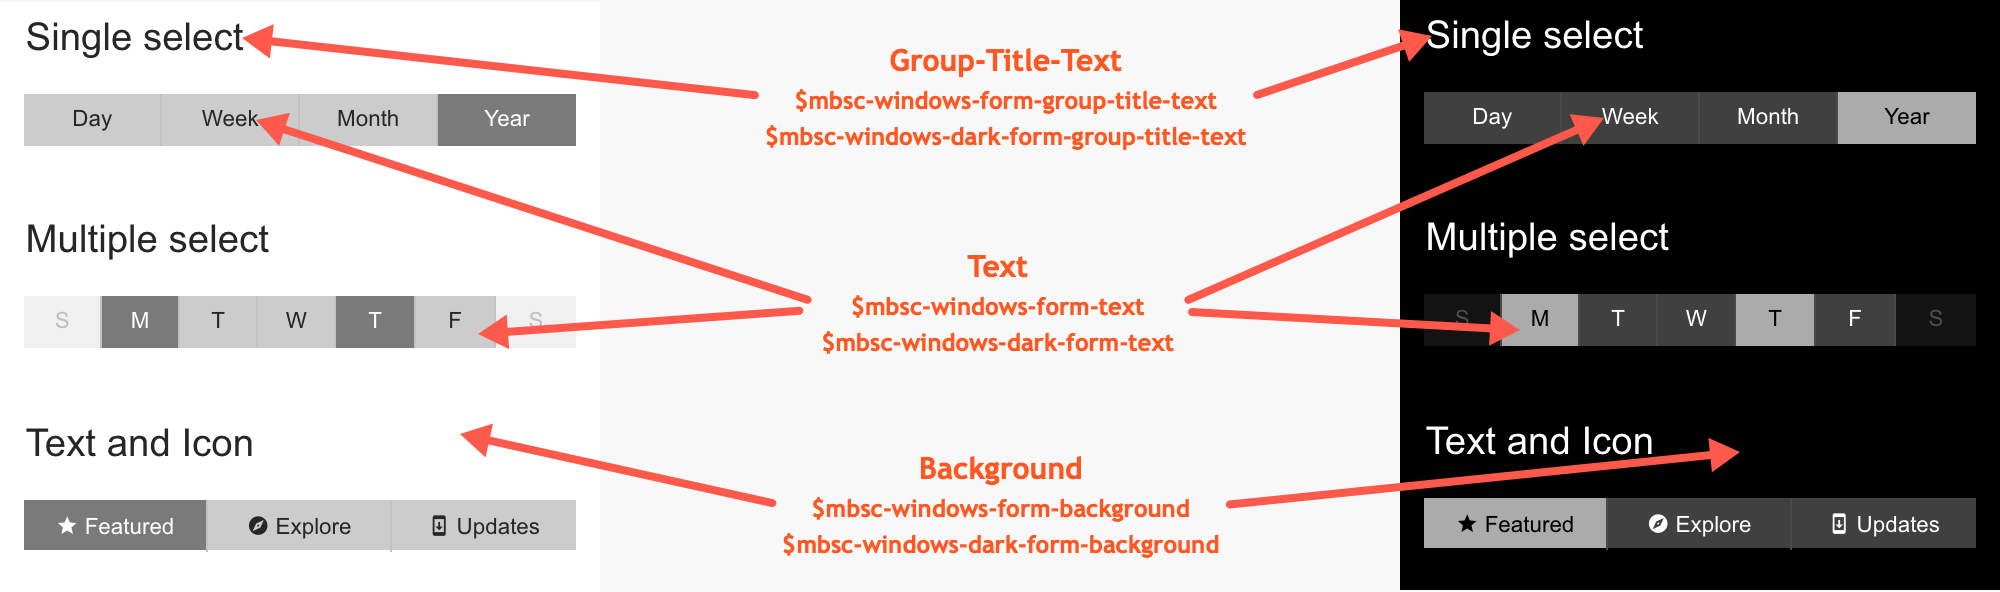 Windows theme variables for the Segmented component